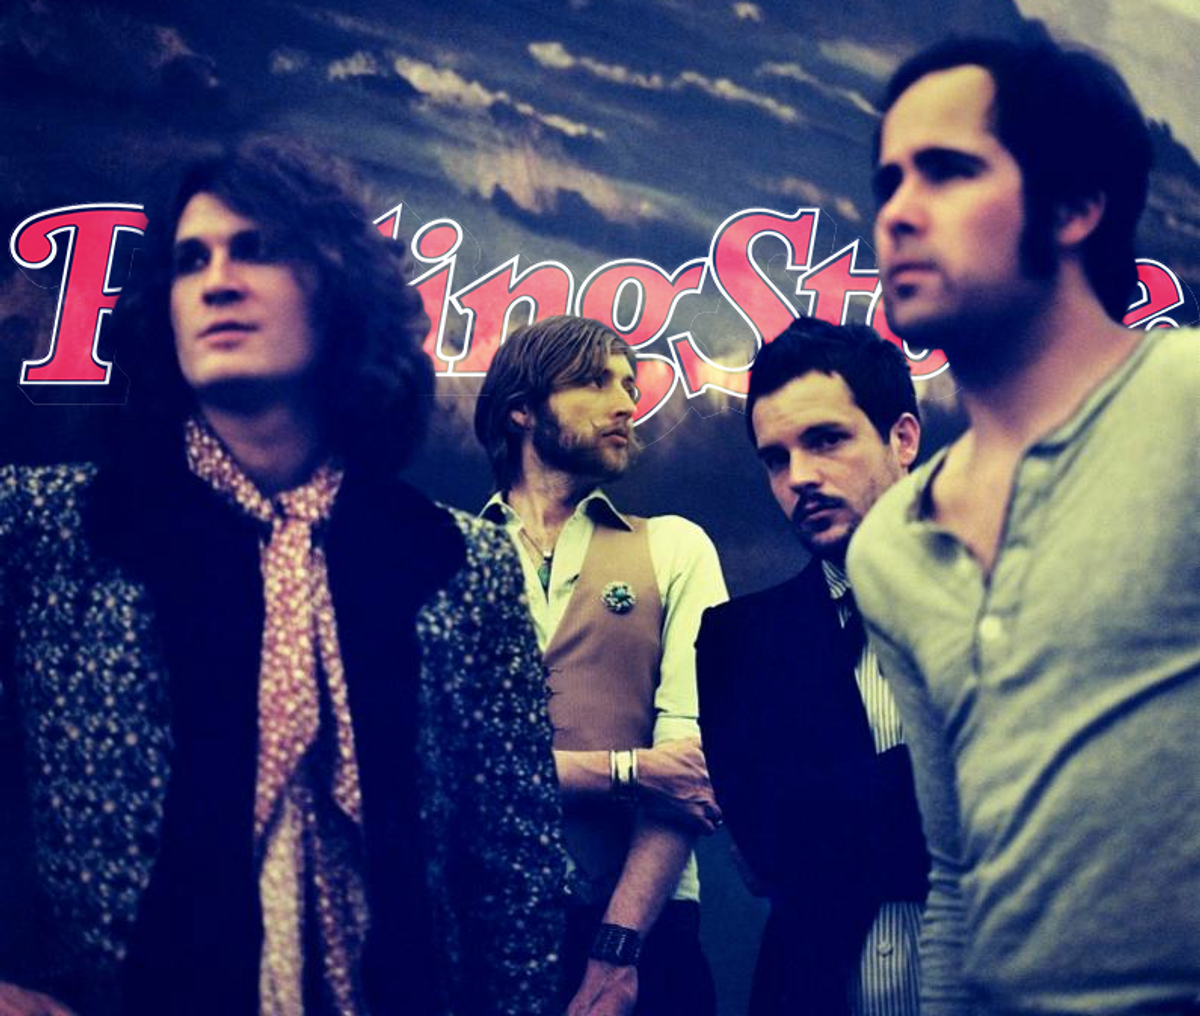 The Killers vs Rolling Stone: The Case Of The Disappearing Album Review